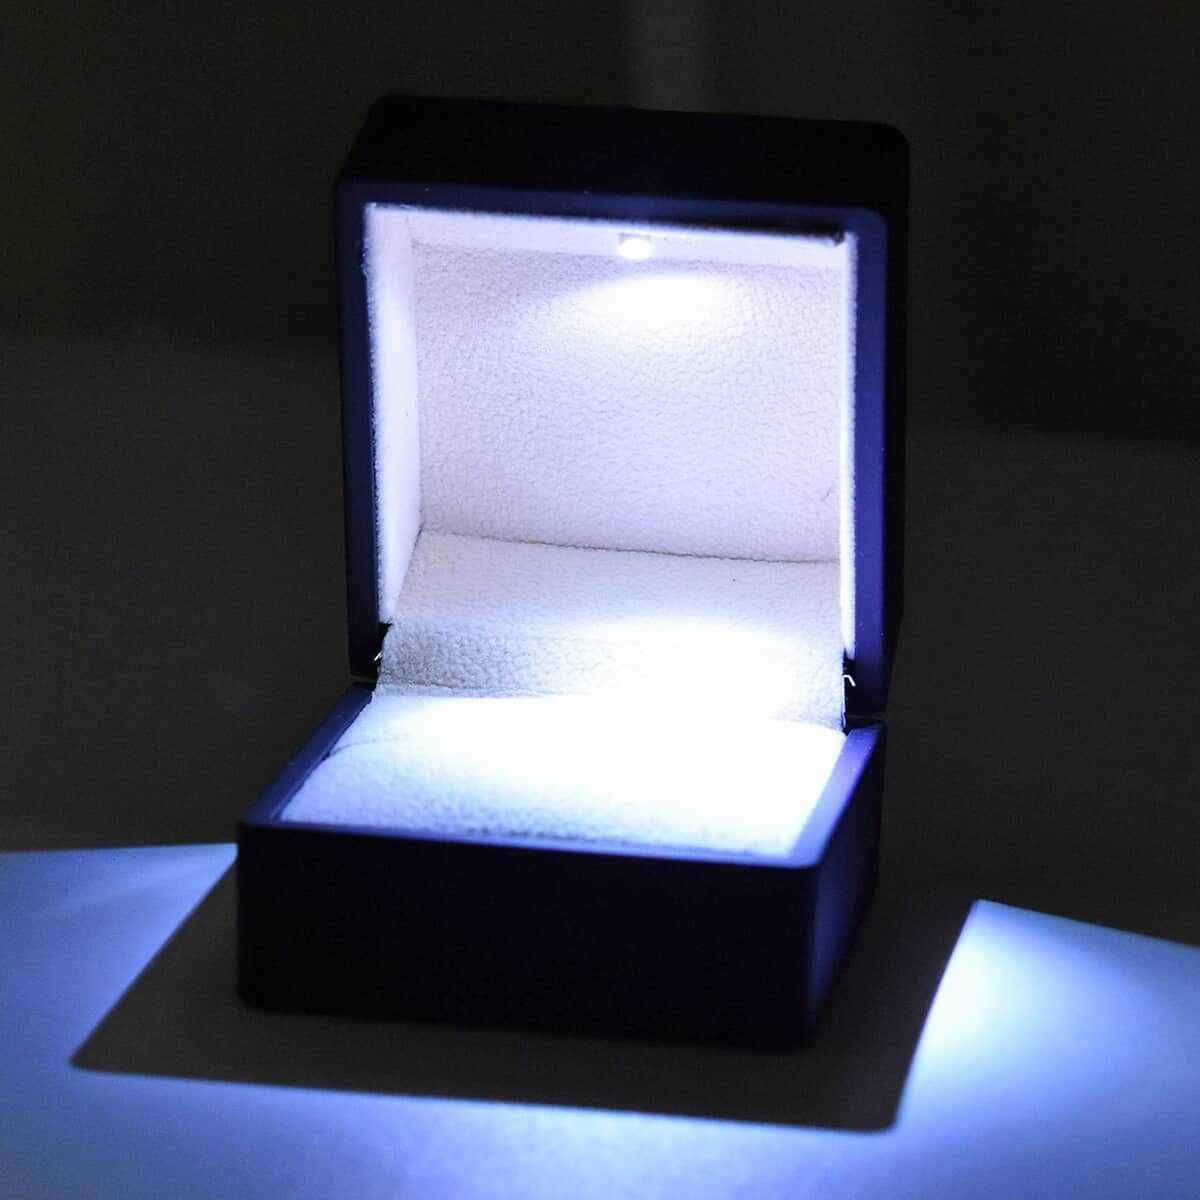 Black Solid Luxurious Polish Ring Jewelry Box with LED Light (Can Hold 1 up to 2 Rings) (2.5"x2.4"x2") image number 1